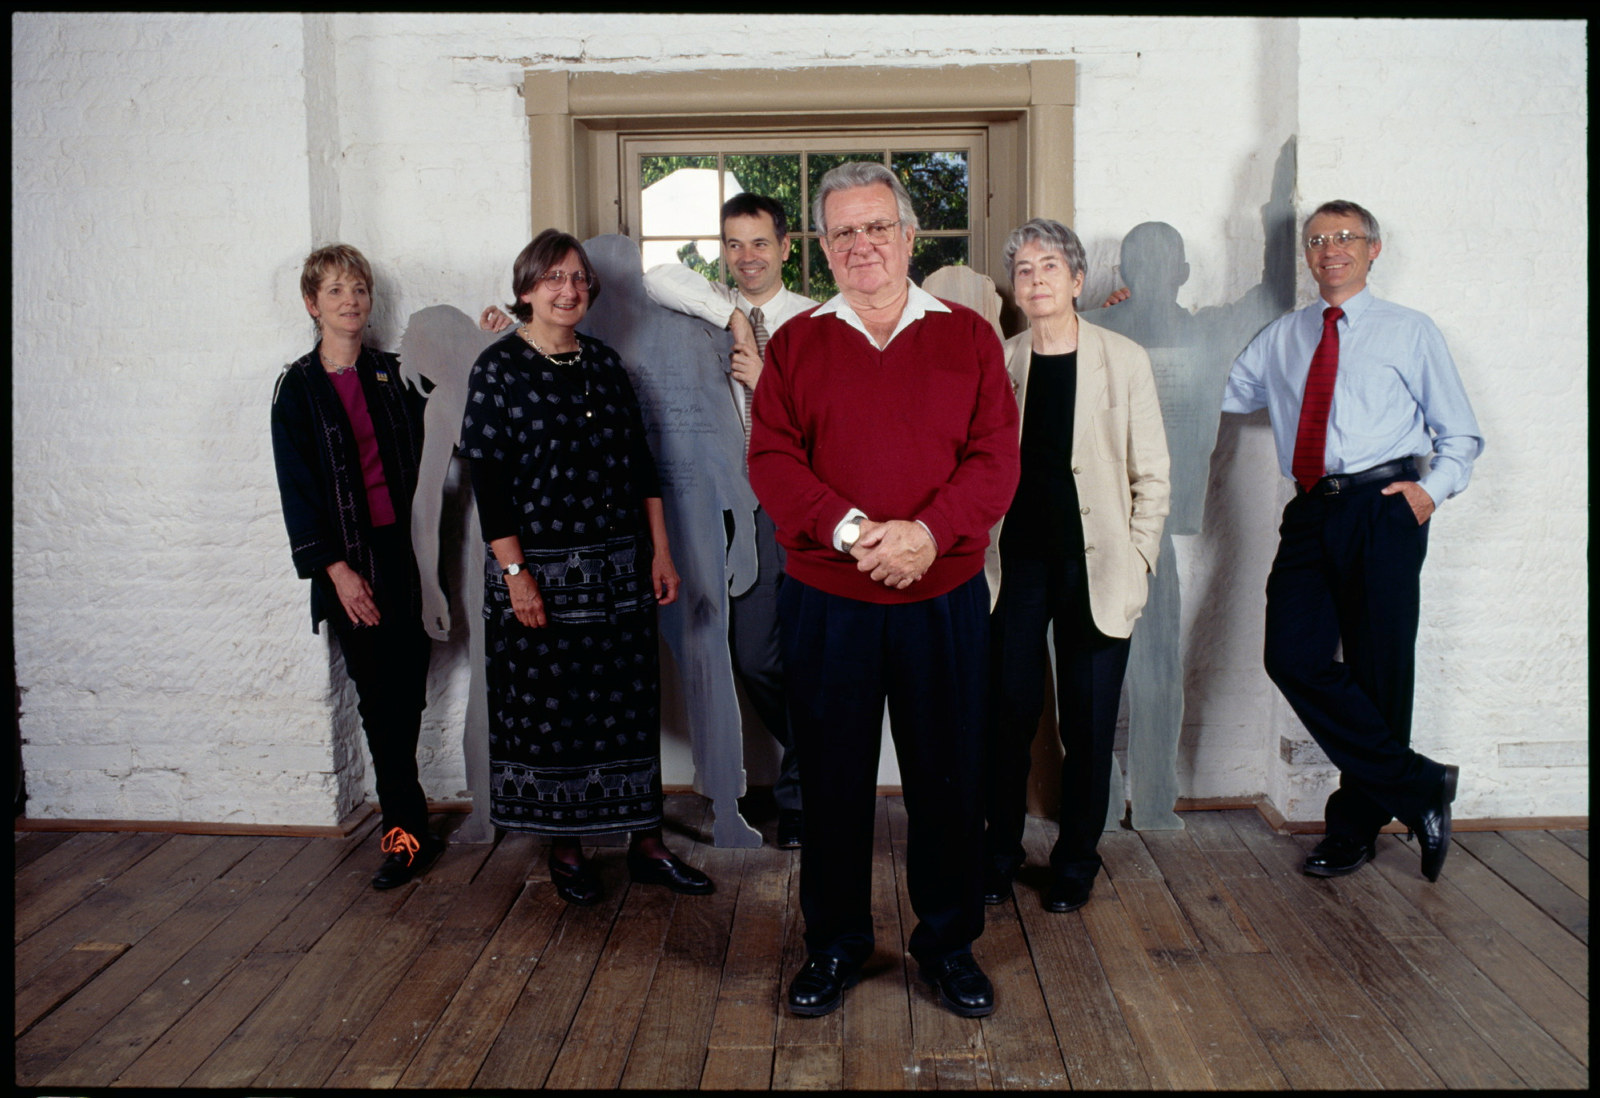 Group of people in white walled room with lifesize cutout figures behind.